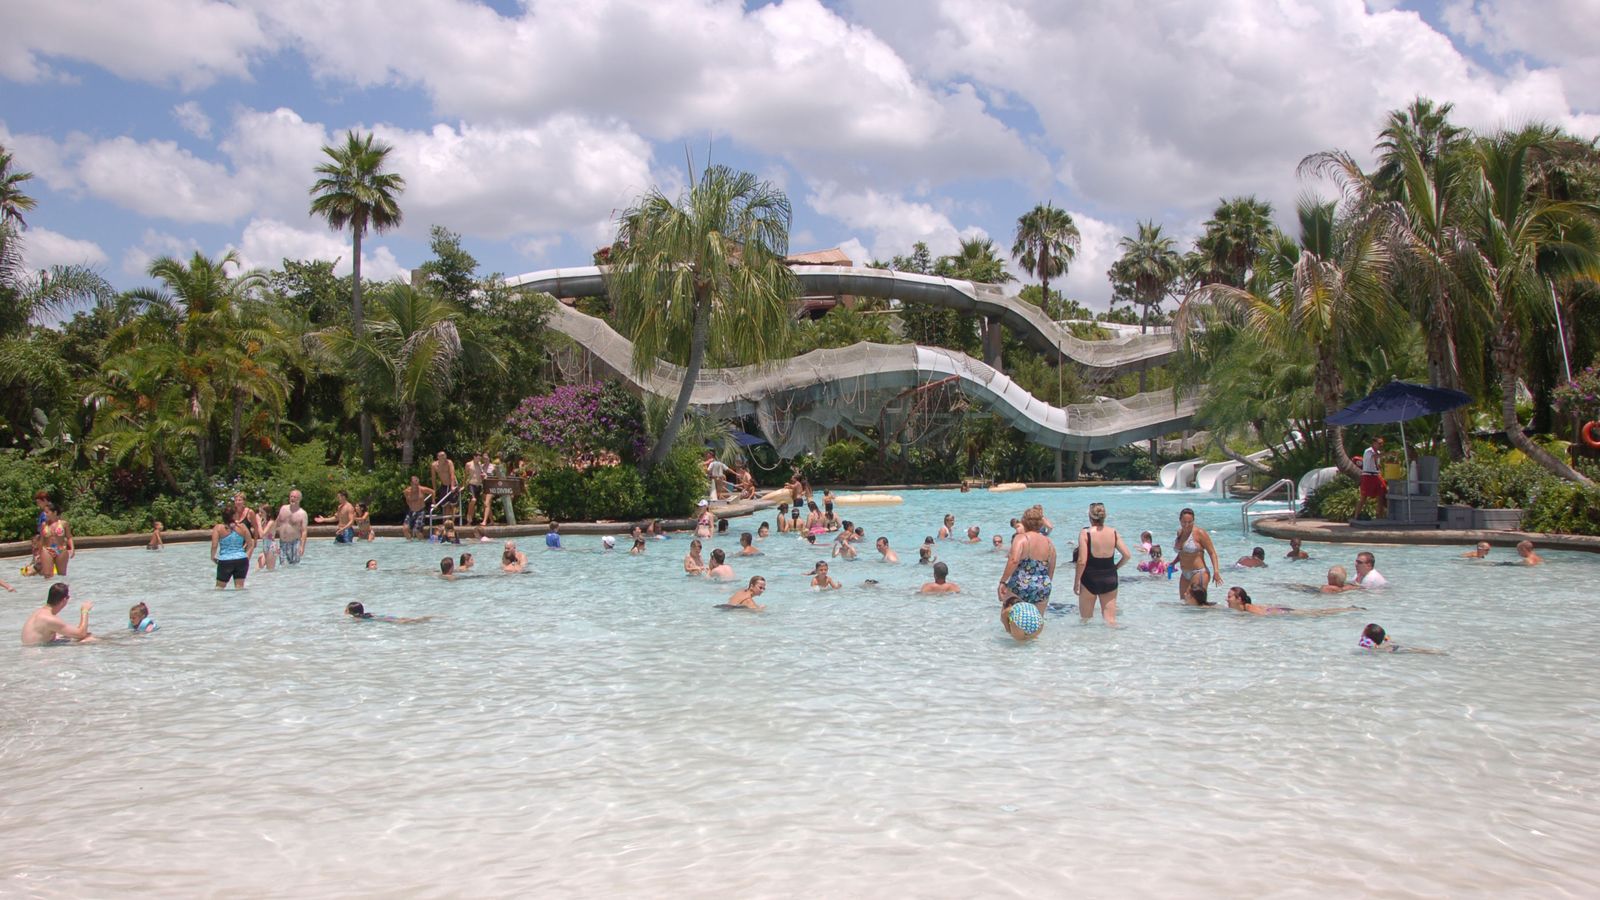 Woman sues Disney theme park over claims water slide gave her 'painful wedgie'